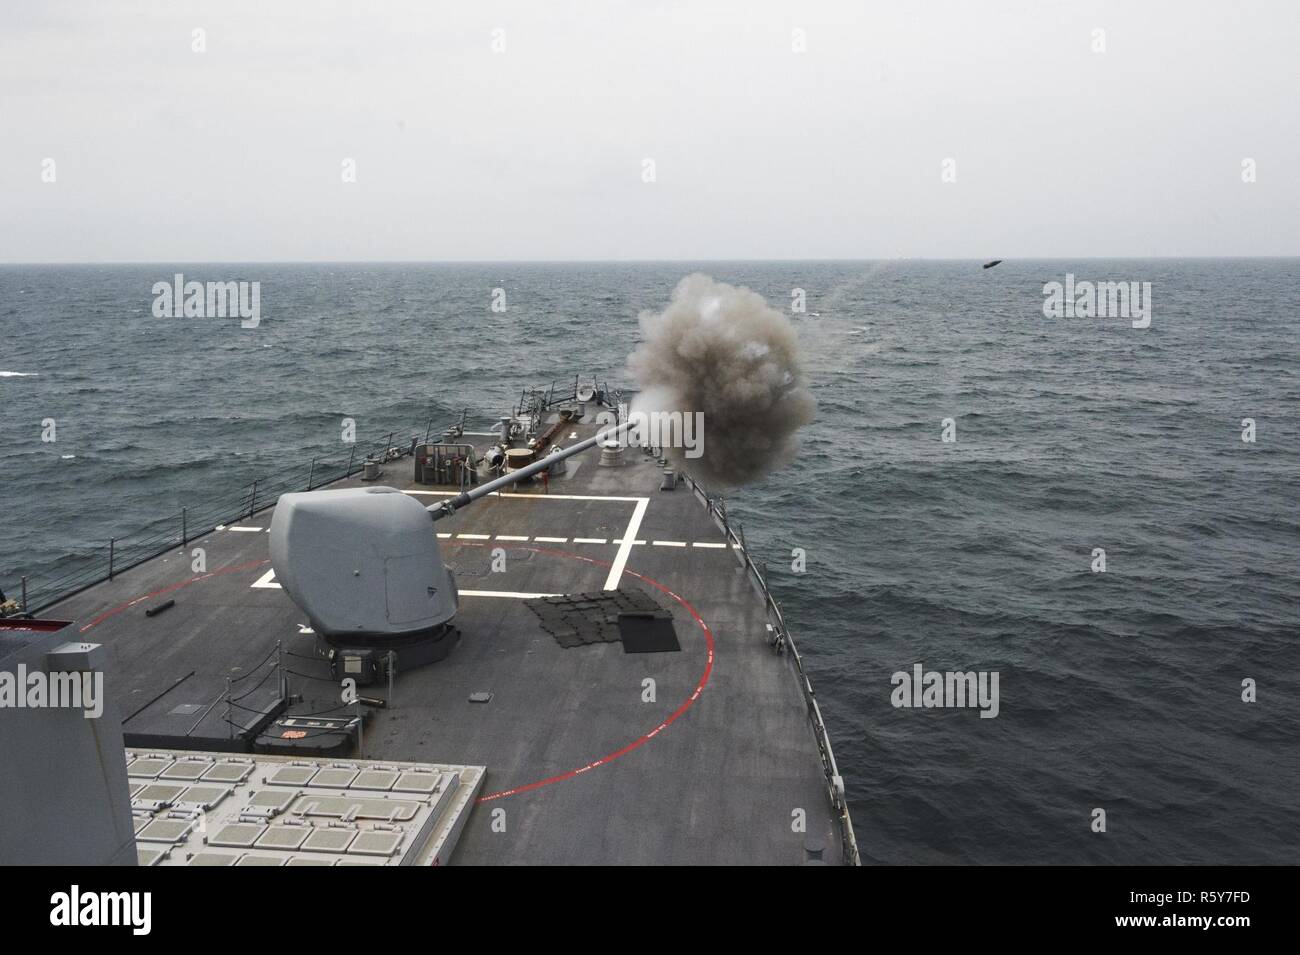 SEA OF JAPAN (April 25, 2017) A M160 5-inch gun weapon system fires ordinance on the forward-deployed Arleigh Burke-class guided-missile destroyer USS Fitzgerald (DDG 62) during a bilateral training exercise with the Kongou class guided-missile destroyer JS Choukai (DDG 176) of the Japanese Maritime Self-Defense Force (JMSDF). Exercises like this enhance information sharing and combined maritime defense capabilities to ensure the U.S. and our allies remain ready to defend the region against any provocations. Stock Photo